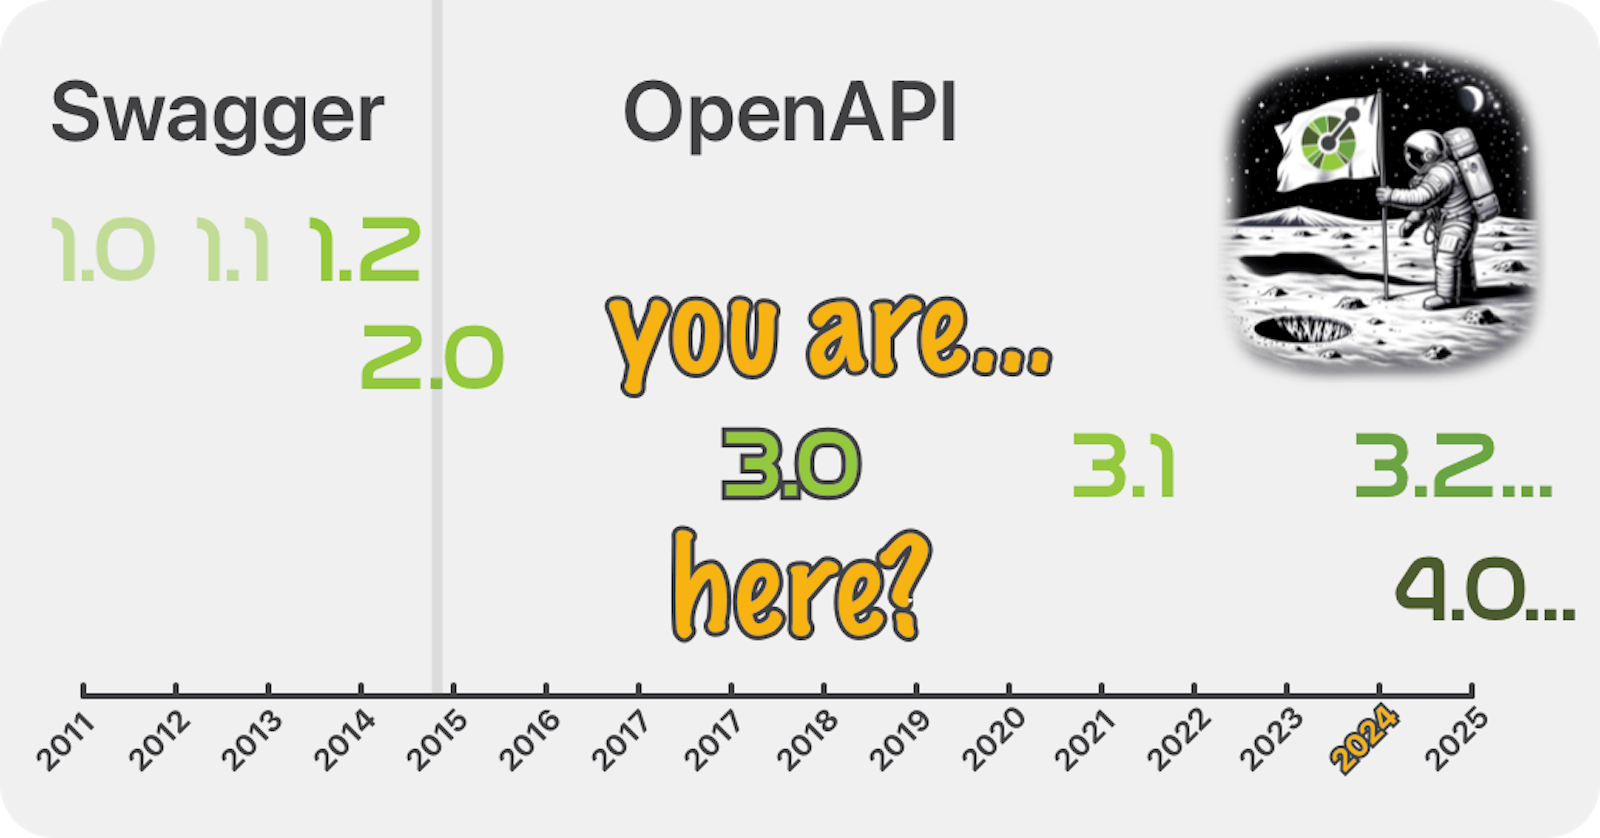 Future-proofing your path from OpenAPI 3.0 to 3.1 and beyond!